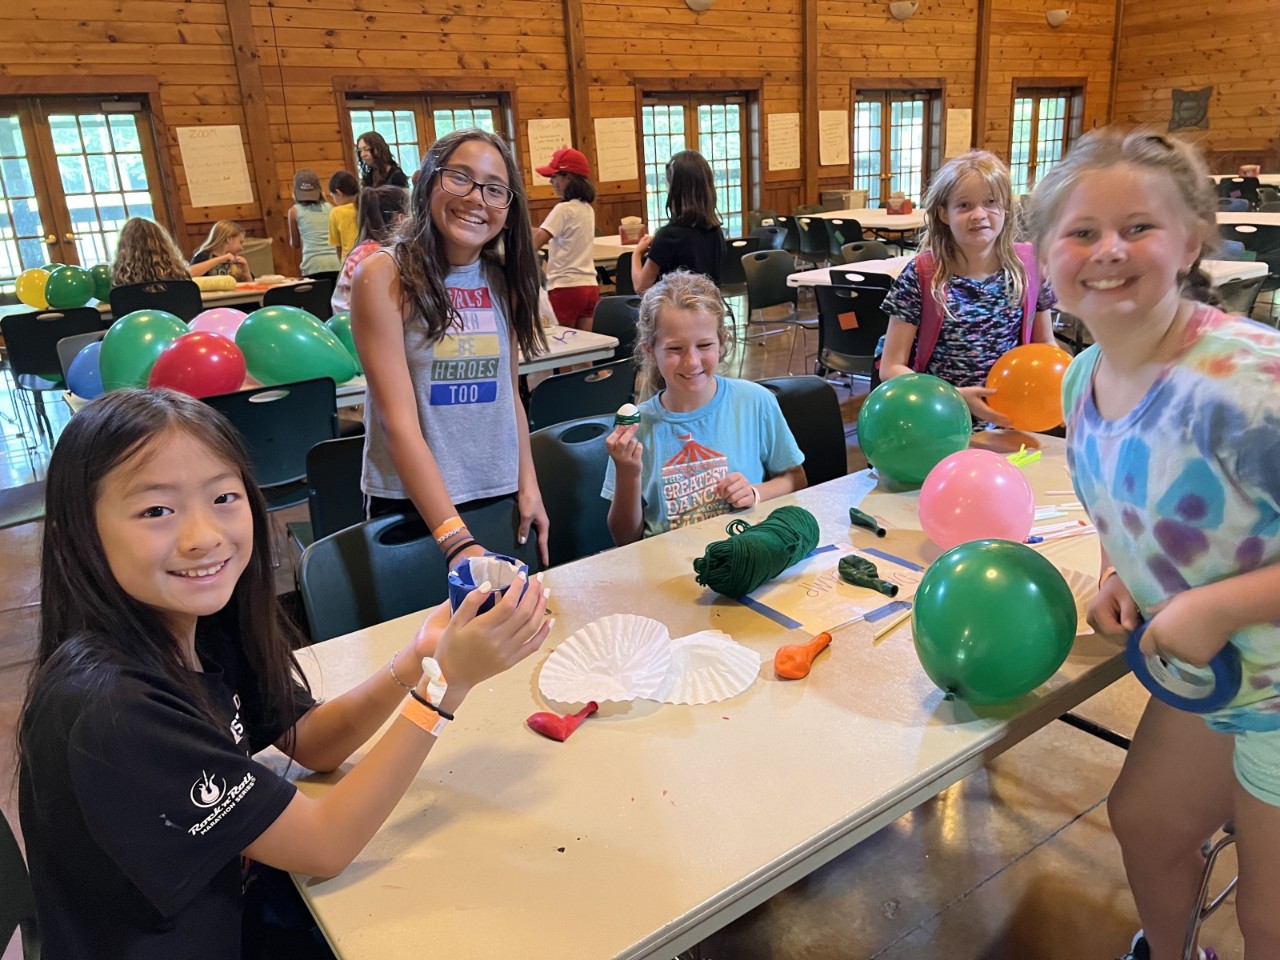 a group of 5 young girls sit at a table in a large cabin with markers and balloons and smile for the camera